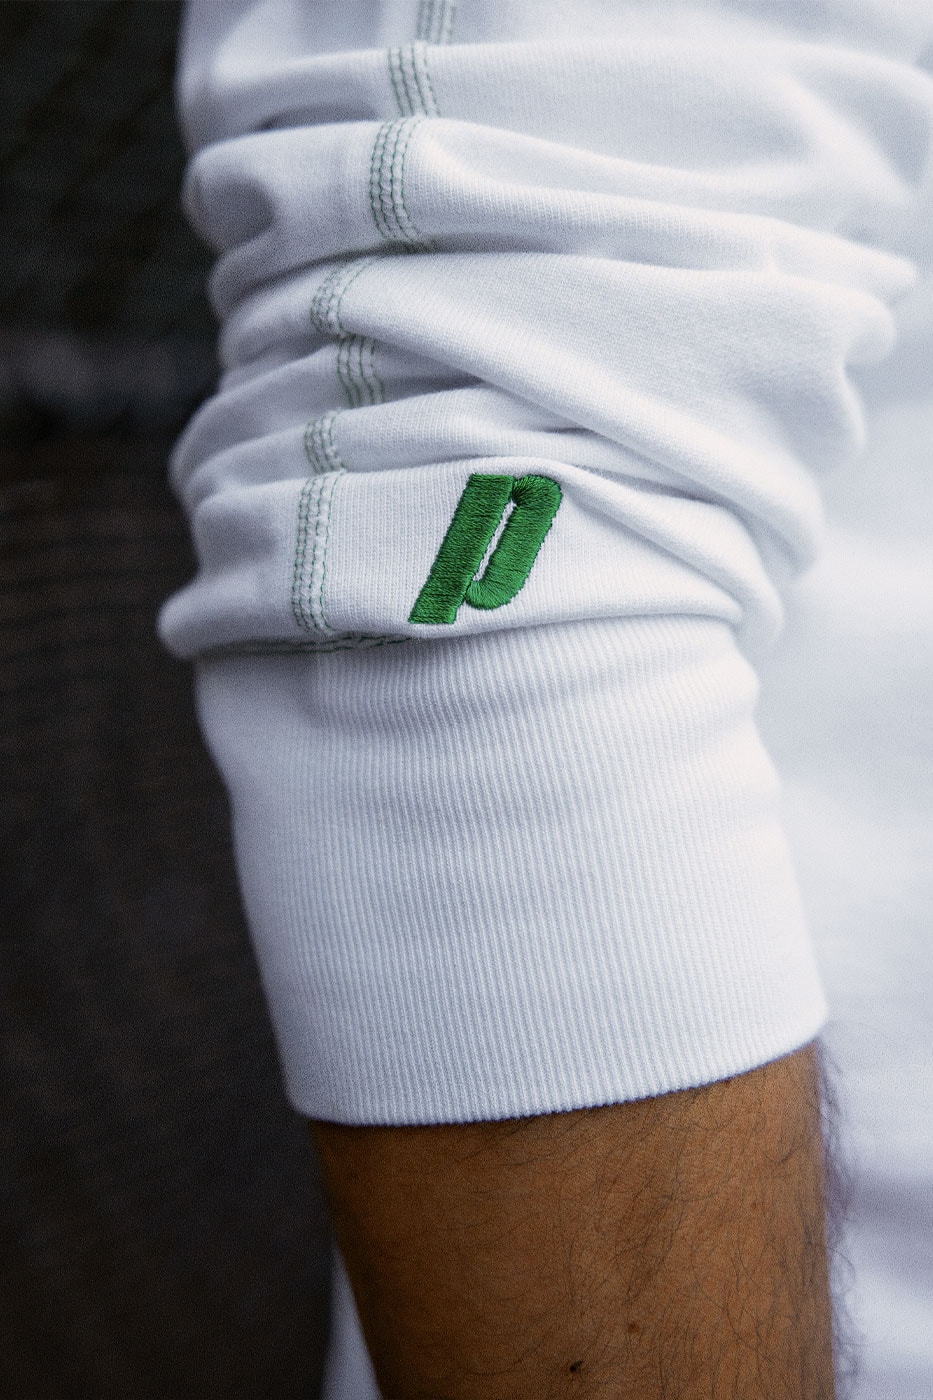 Reigning Champ vs Prince Tennis Collection Collaboration june 28 imagery graphite racquet unisex apparel balls green white towels release info date price purchase